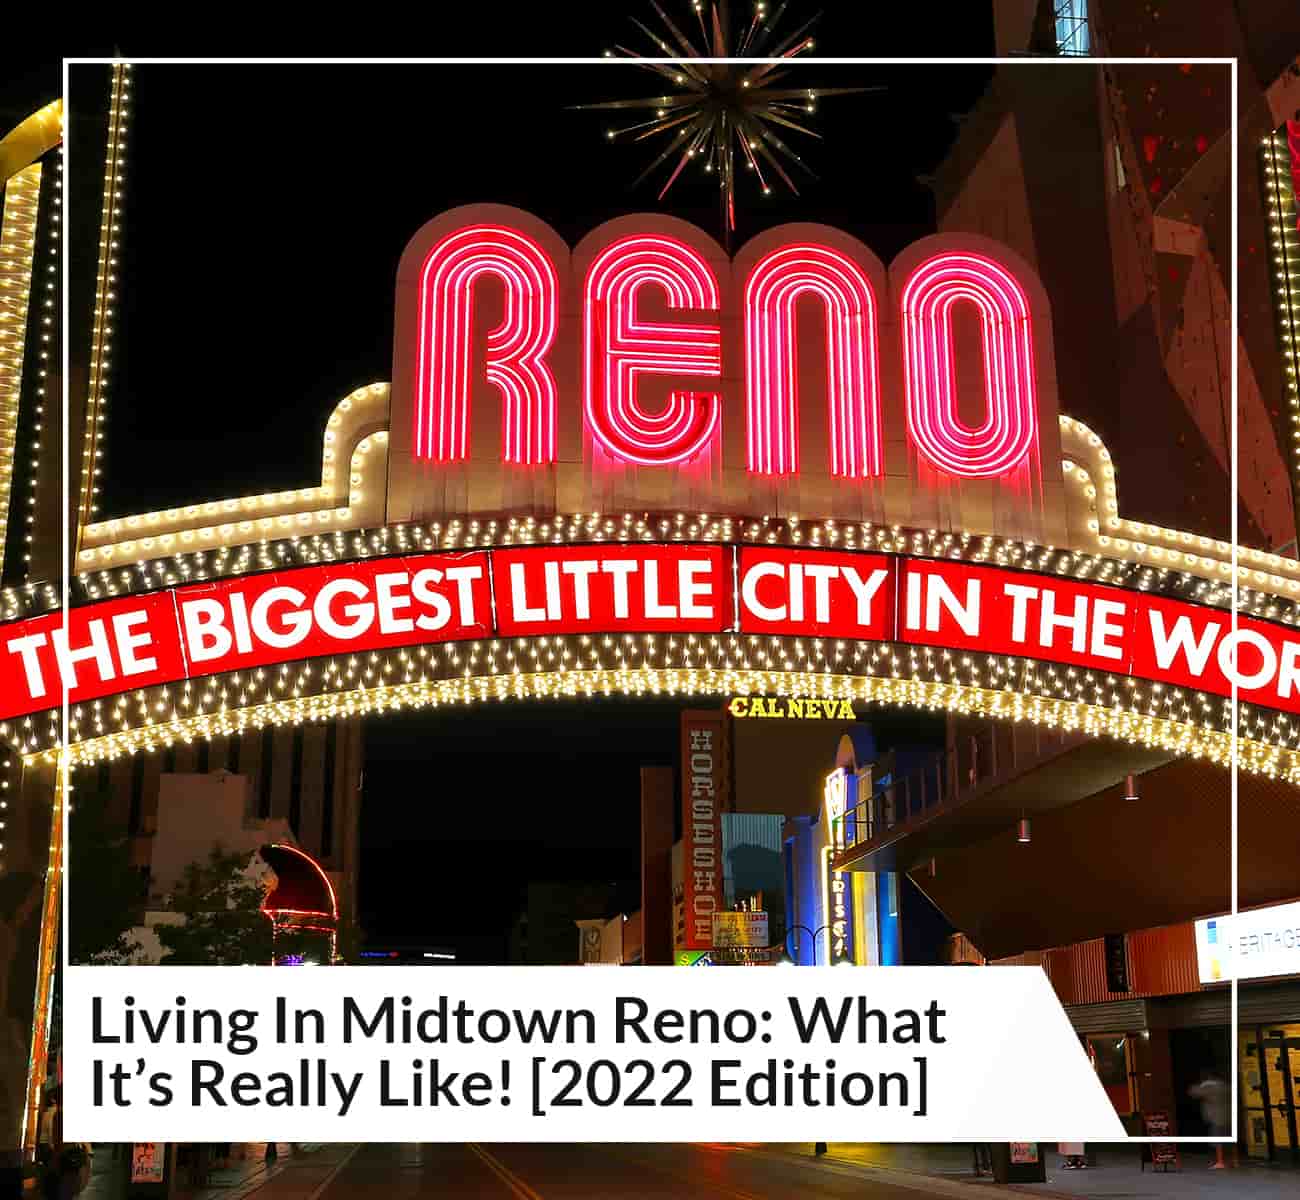 Living In Midtown Reno: What It's Really Like! [2022 Edition] - Main Image